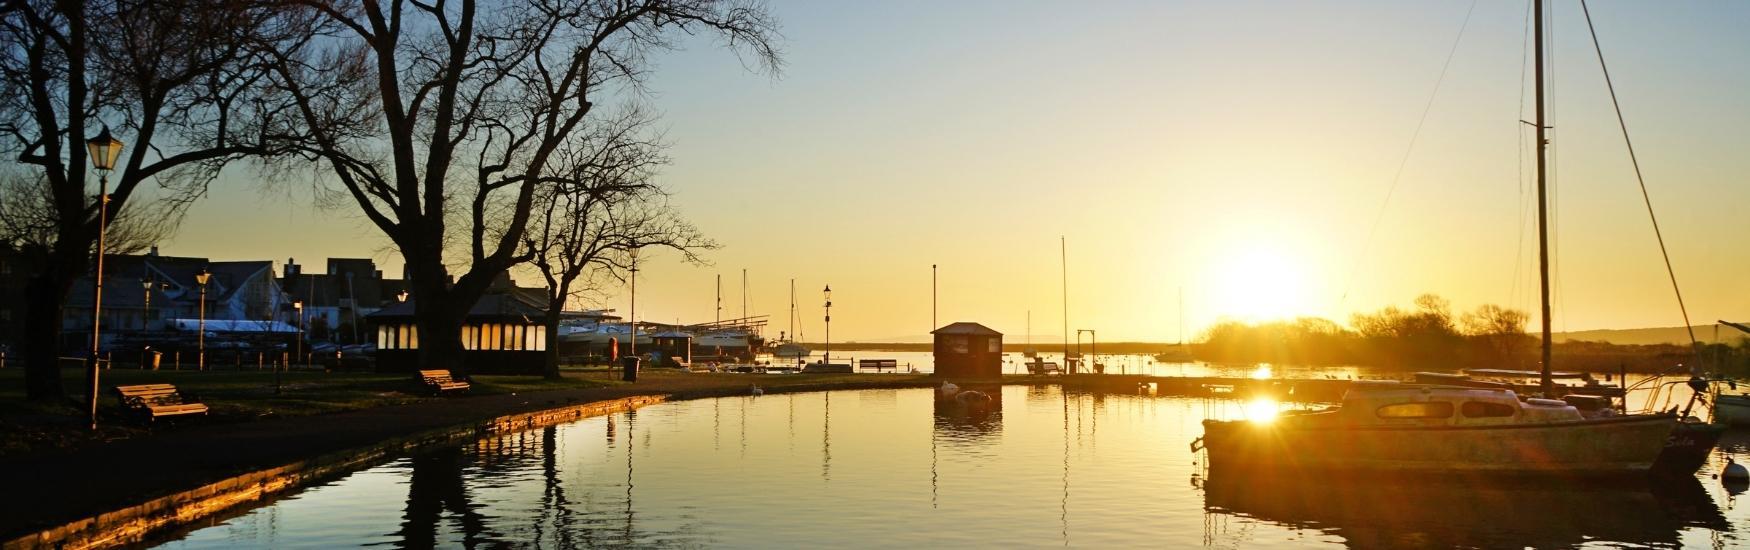 Tranquil scenes as the sunsets at Christchurch quay